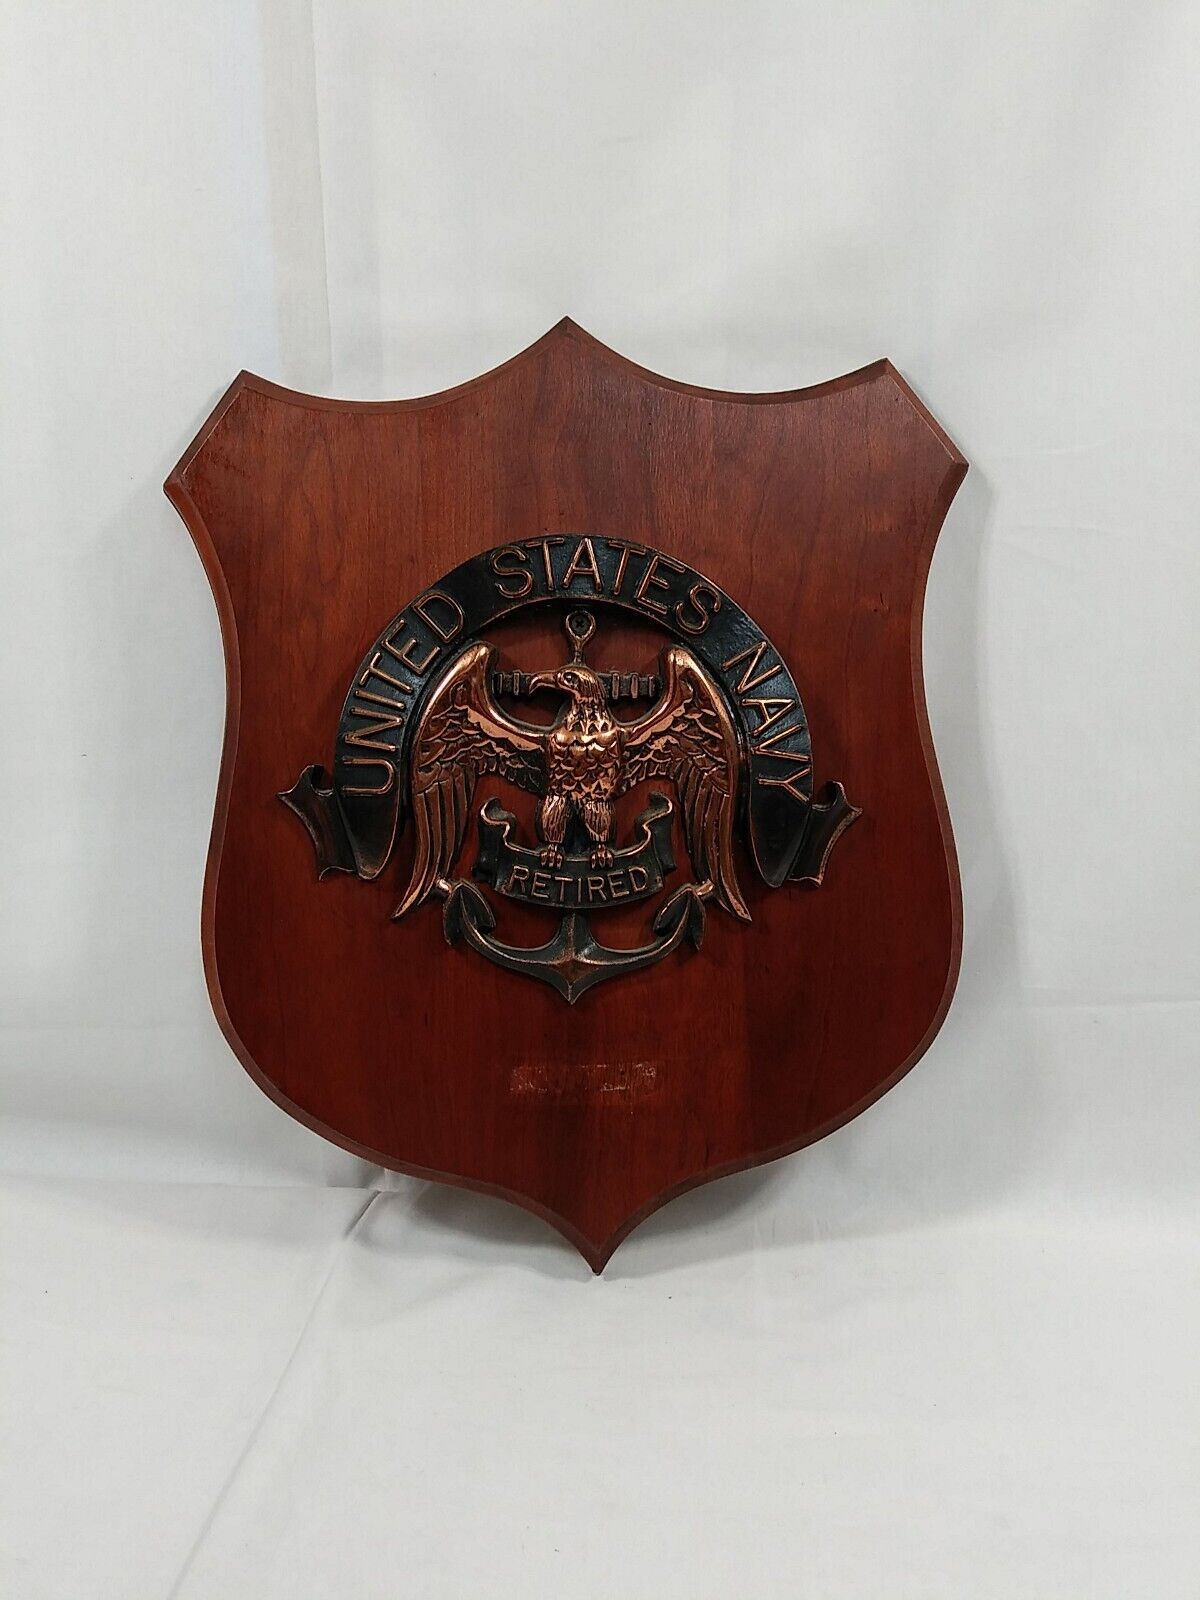 United States Navy Retired Plaque large,approximately 18 by 14 inches 